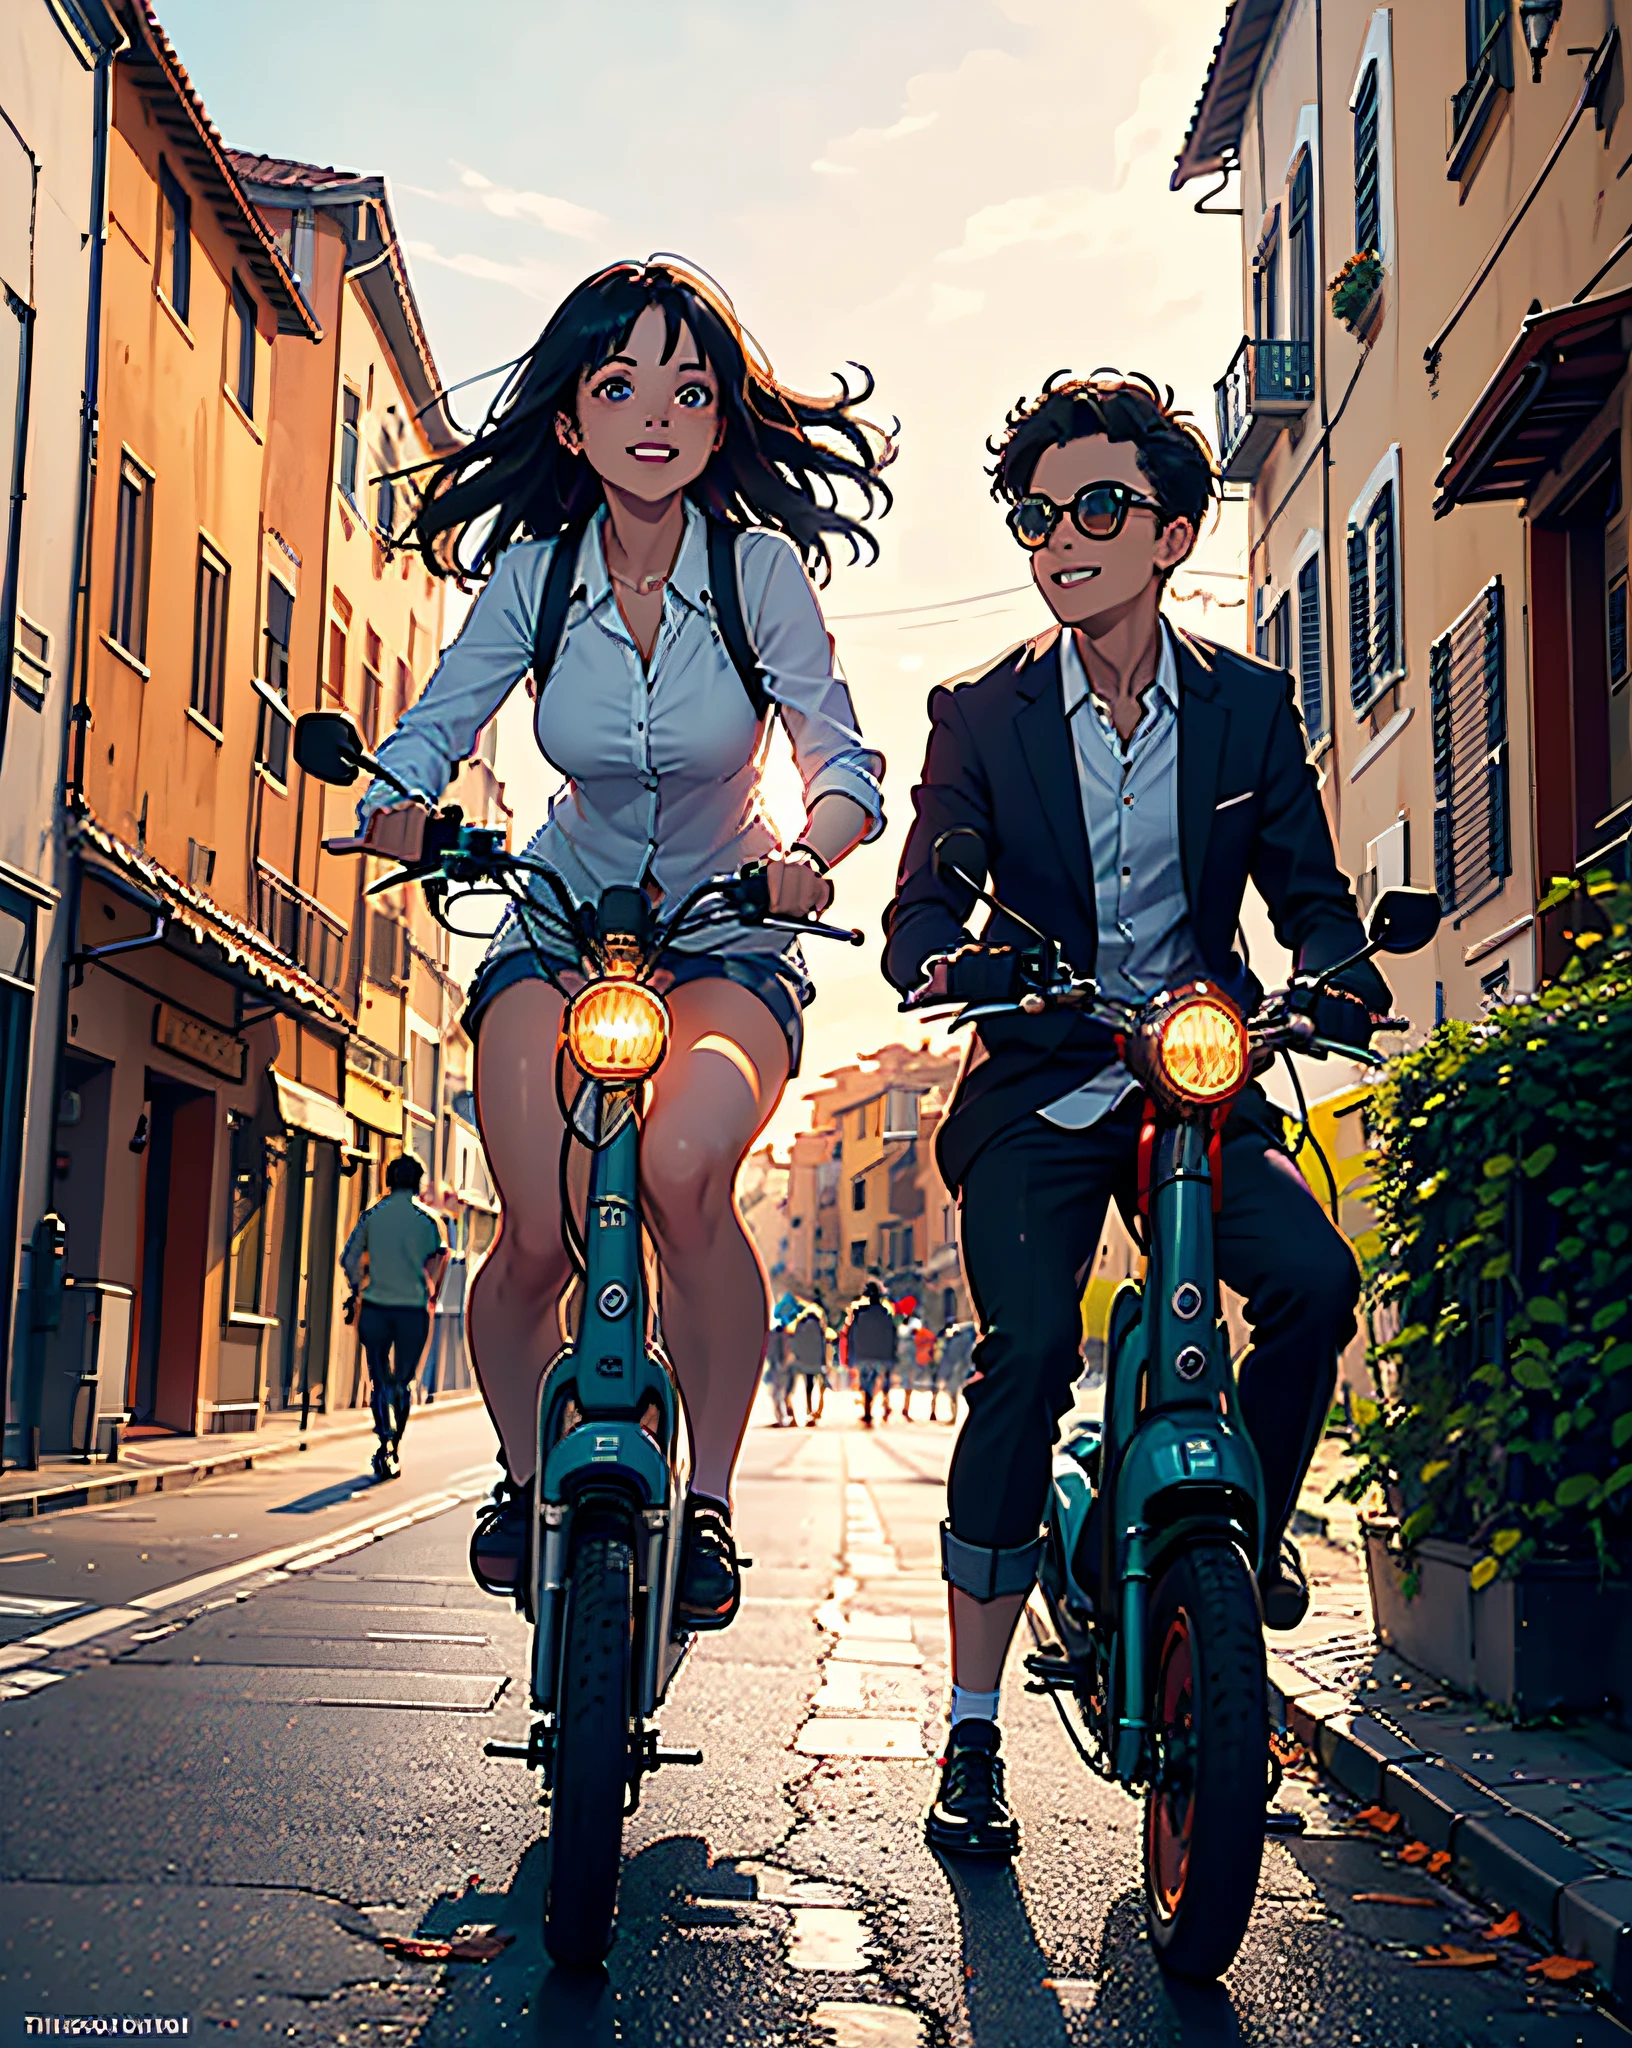 masterpiece, best quality, illustration, ultra-detailed, finely detail, highres, 8k wallpaper, perfect dynamic composition, beautiful detailed eyes, natural lip, An illustration of a scene in which the two main characters are traveling around Rome on a scooter in Roman Holiday. The time period is evening. The location is the streets of Rome. The two main characters are riding scooters and running through the streets of Rome. The two are happily talking and smiling. In the background you can see the ancient architecture of Rome. The sky is red with the setting sun. Tourists from Rome are walking around them. The two continue to run on their scooters, enjoying the streets of Rome. This illustration cuts out a beautiful scene from a Roman holiday. The happy smiles of the two and the beautiful streets of Rome captivate the viewer.